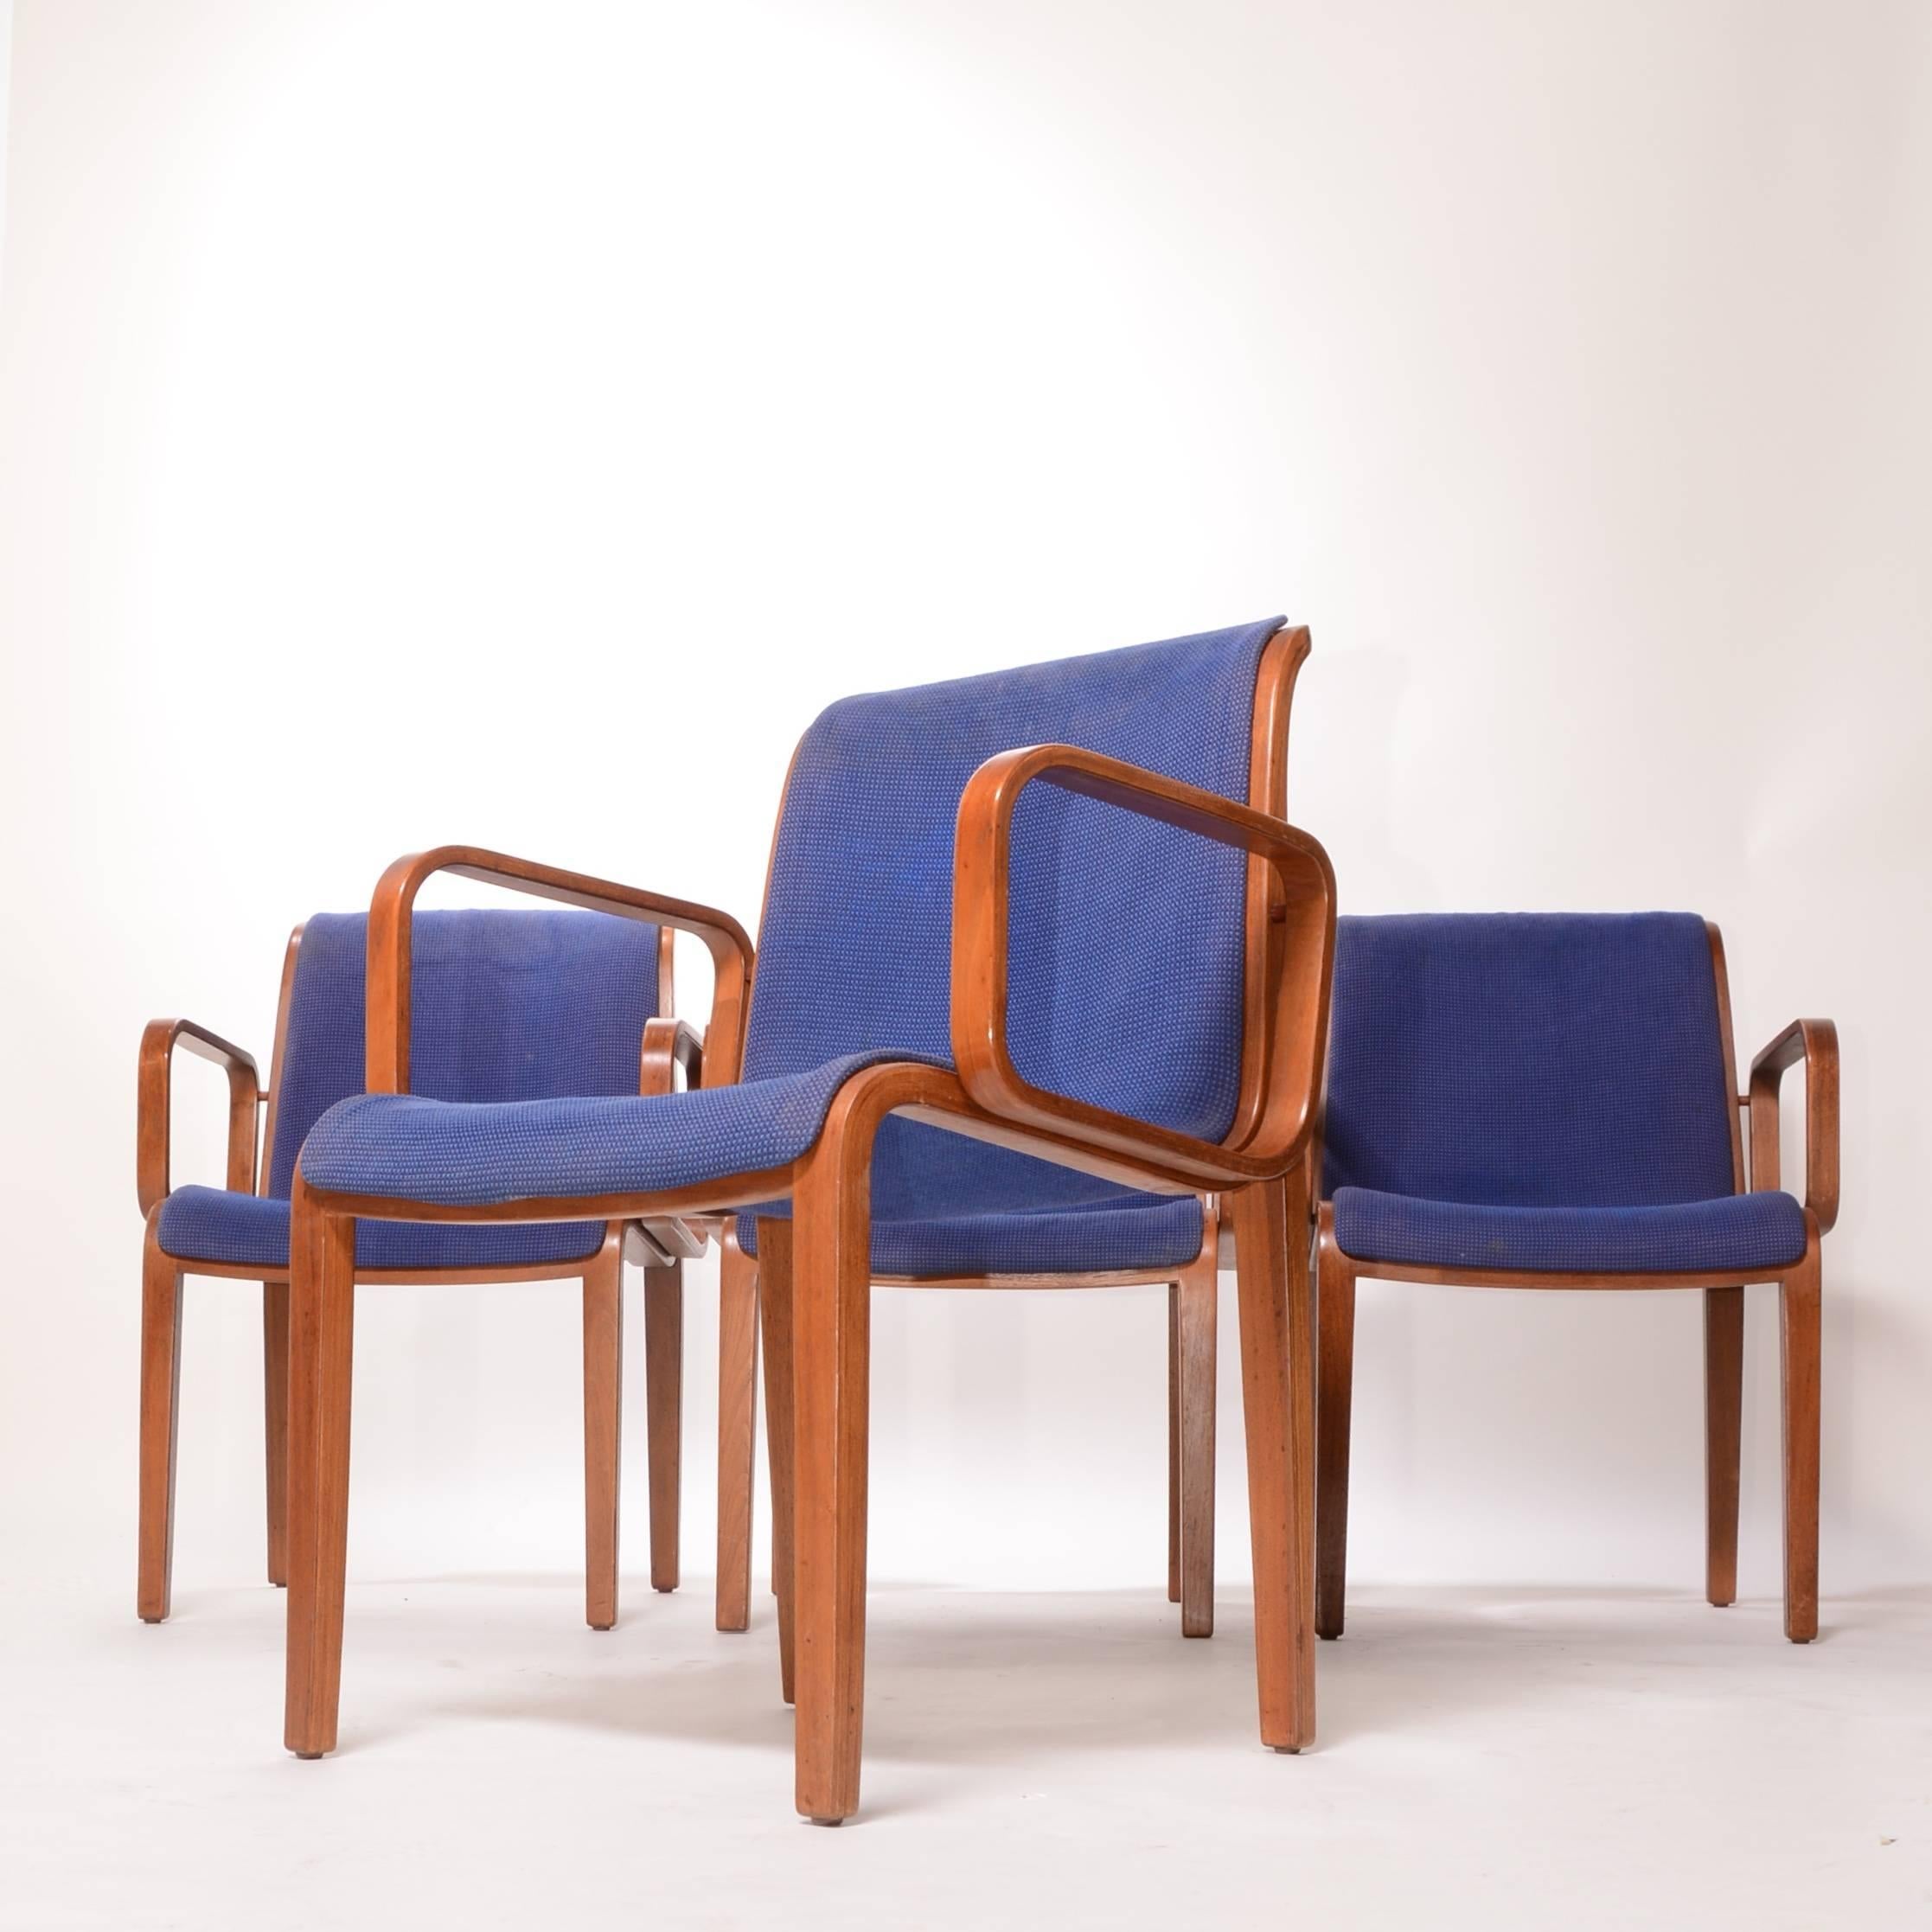 Four Bill Stephens armchairs. Priced to move and room for recommended re-upholstery. Oak frames are in great condition.